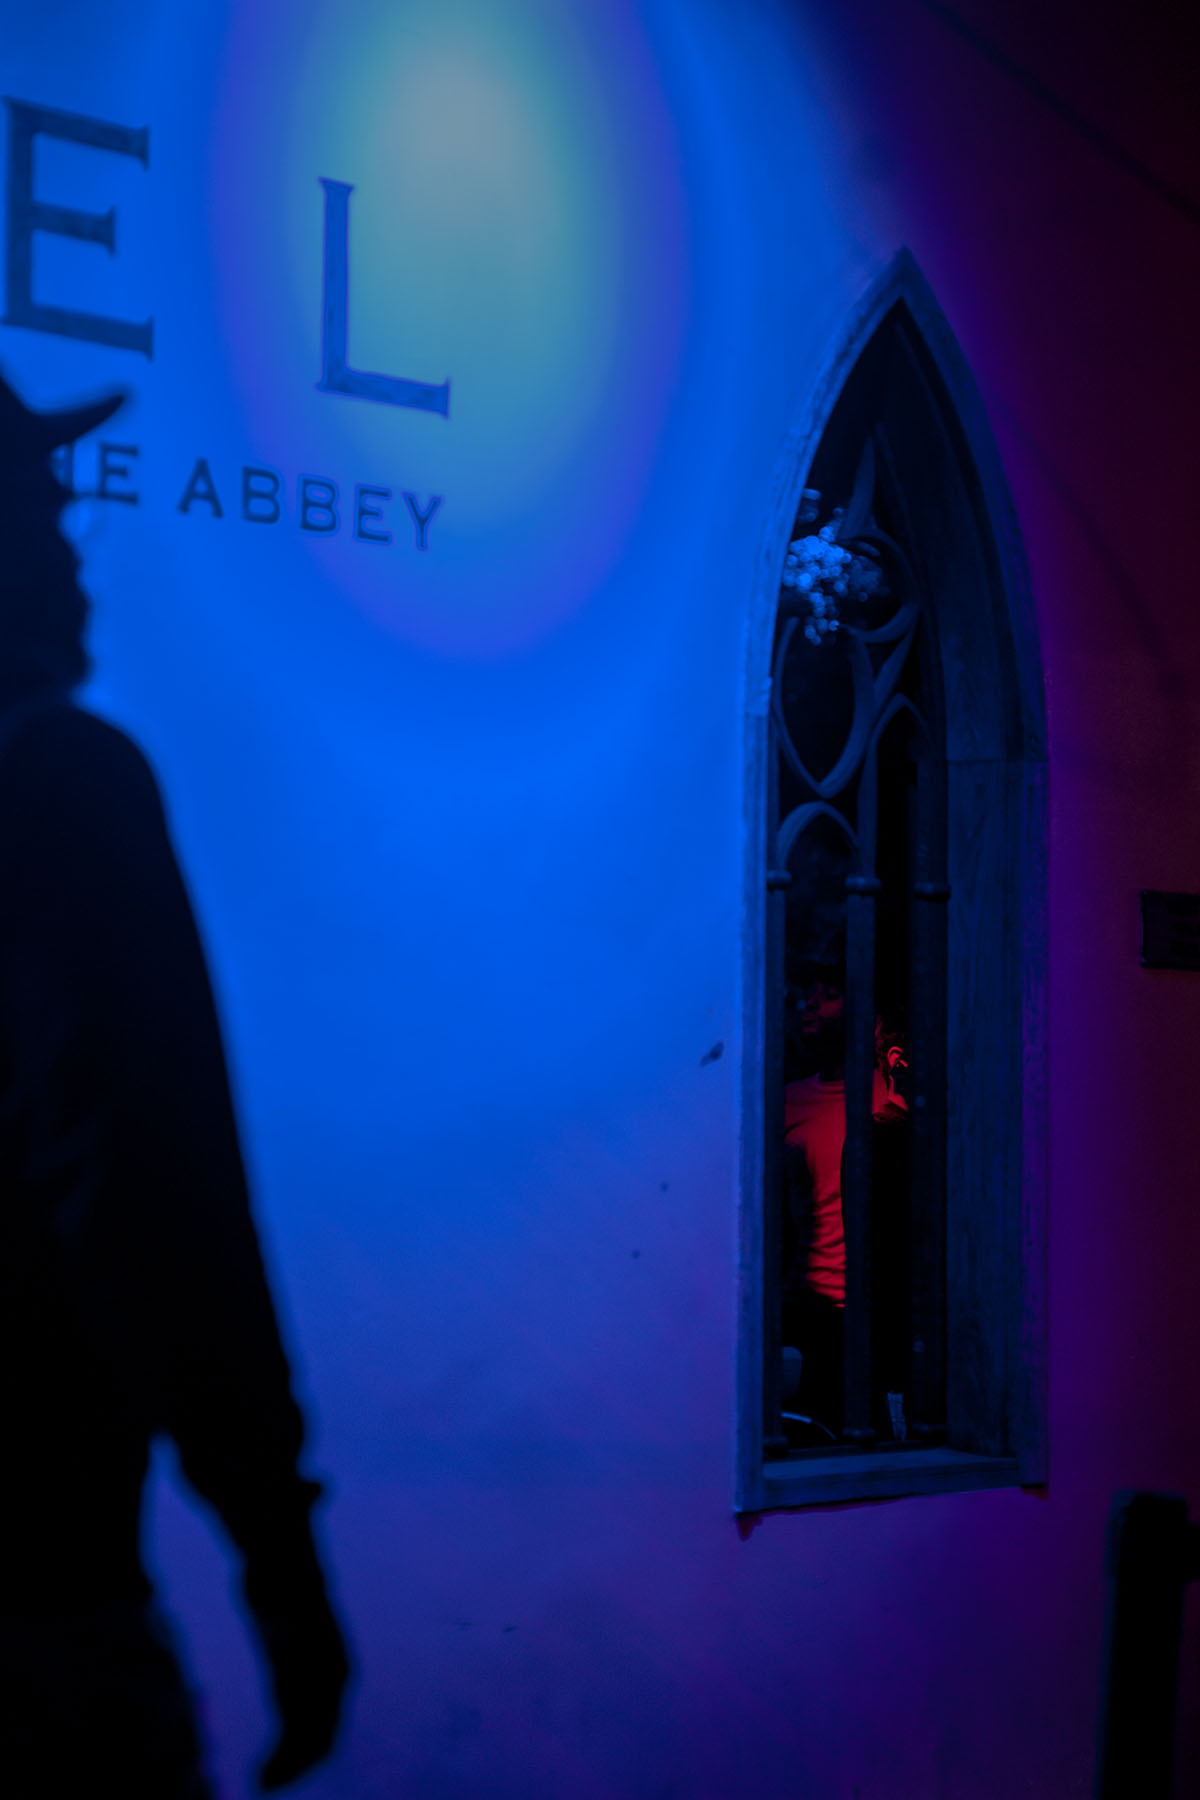 A silhouette is seen near the entrance of The Chapel at The Abbey.